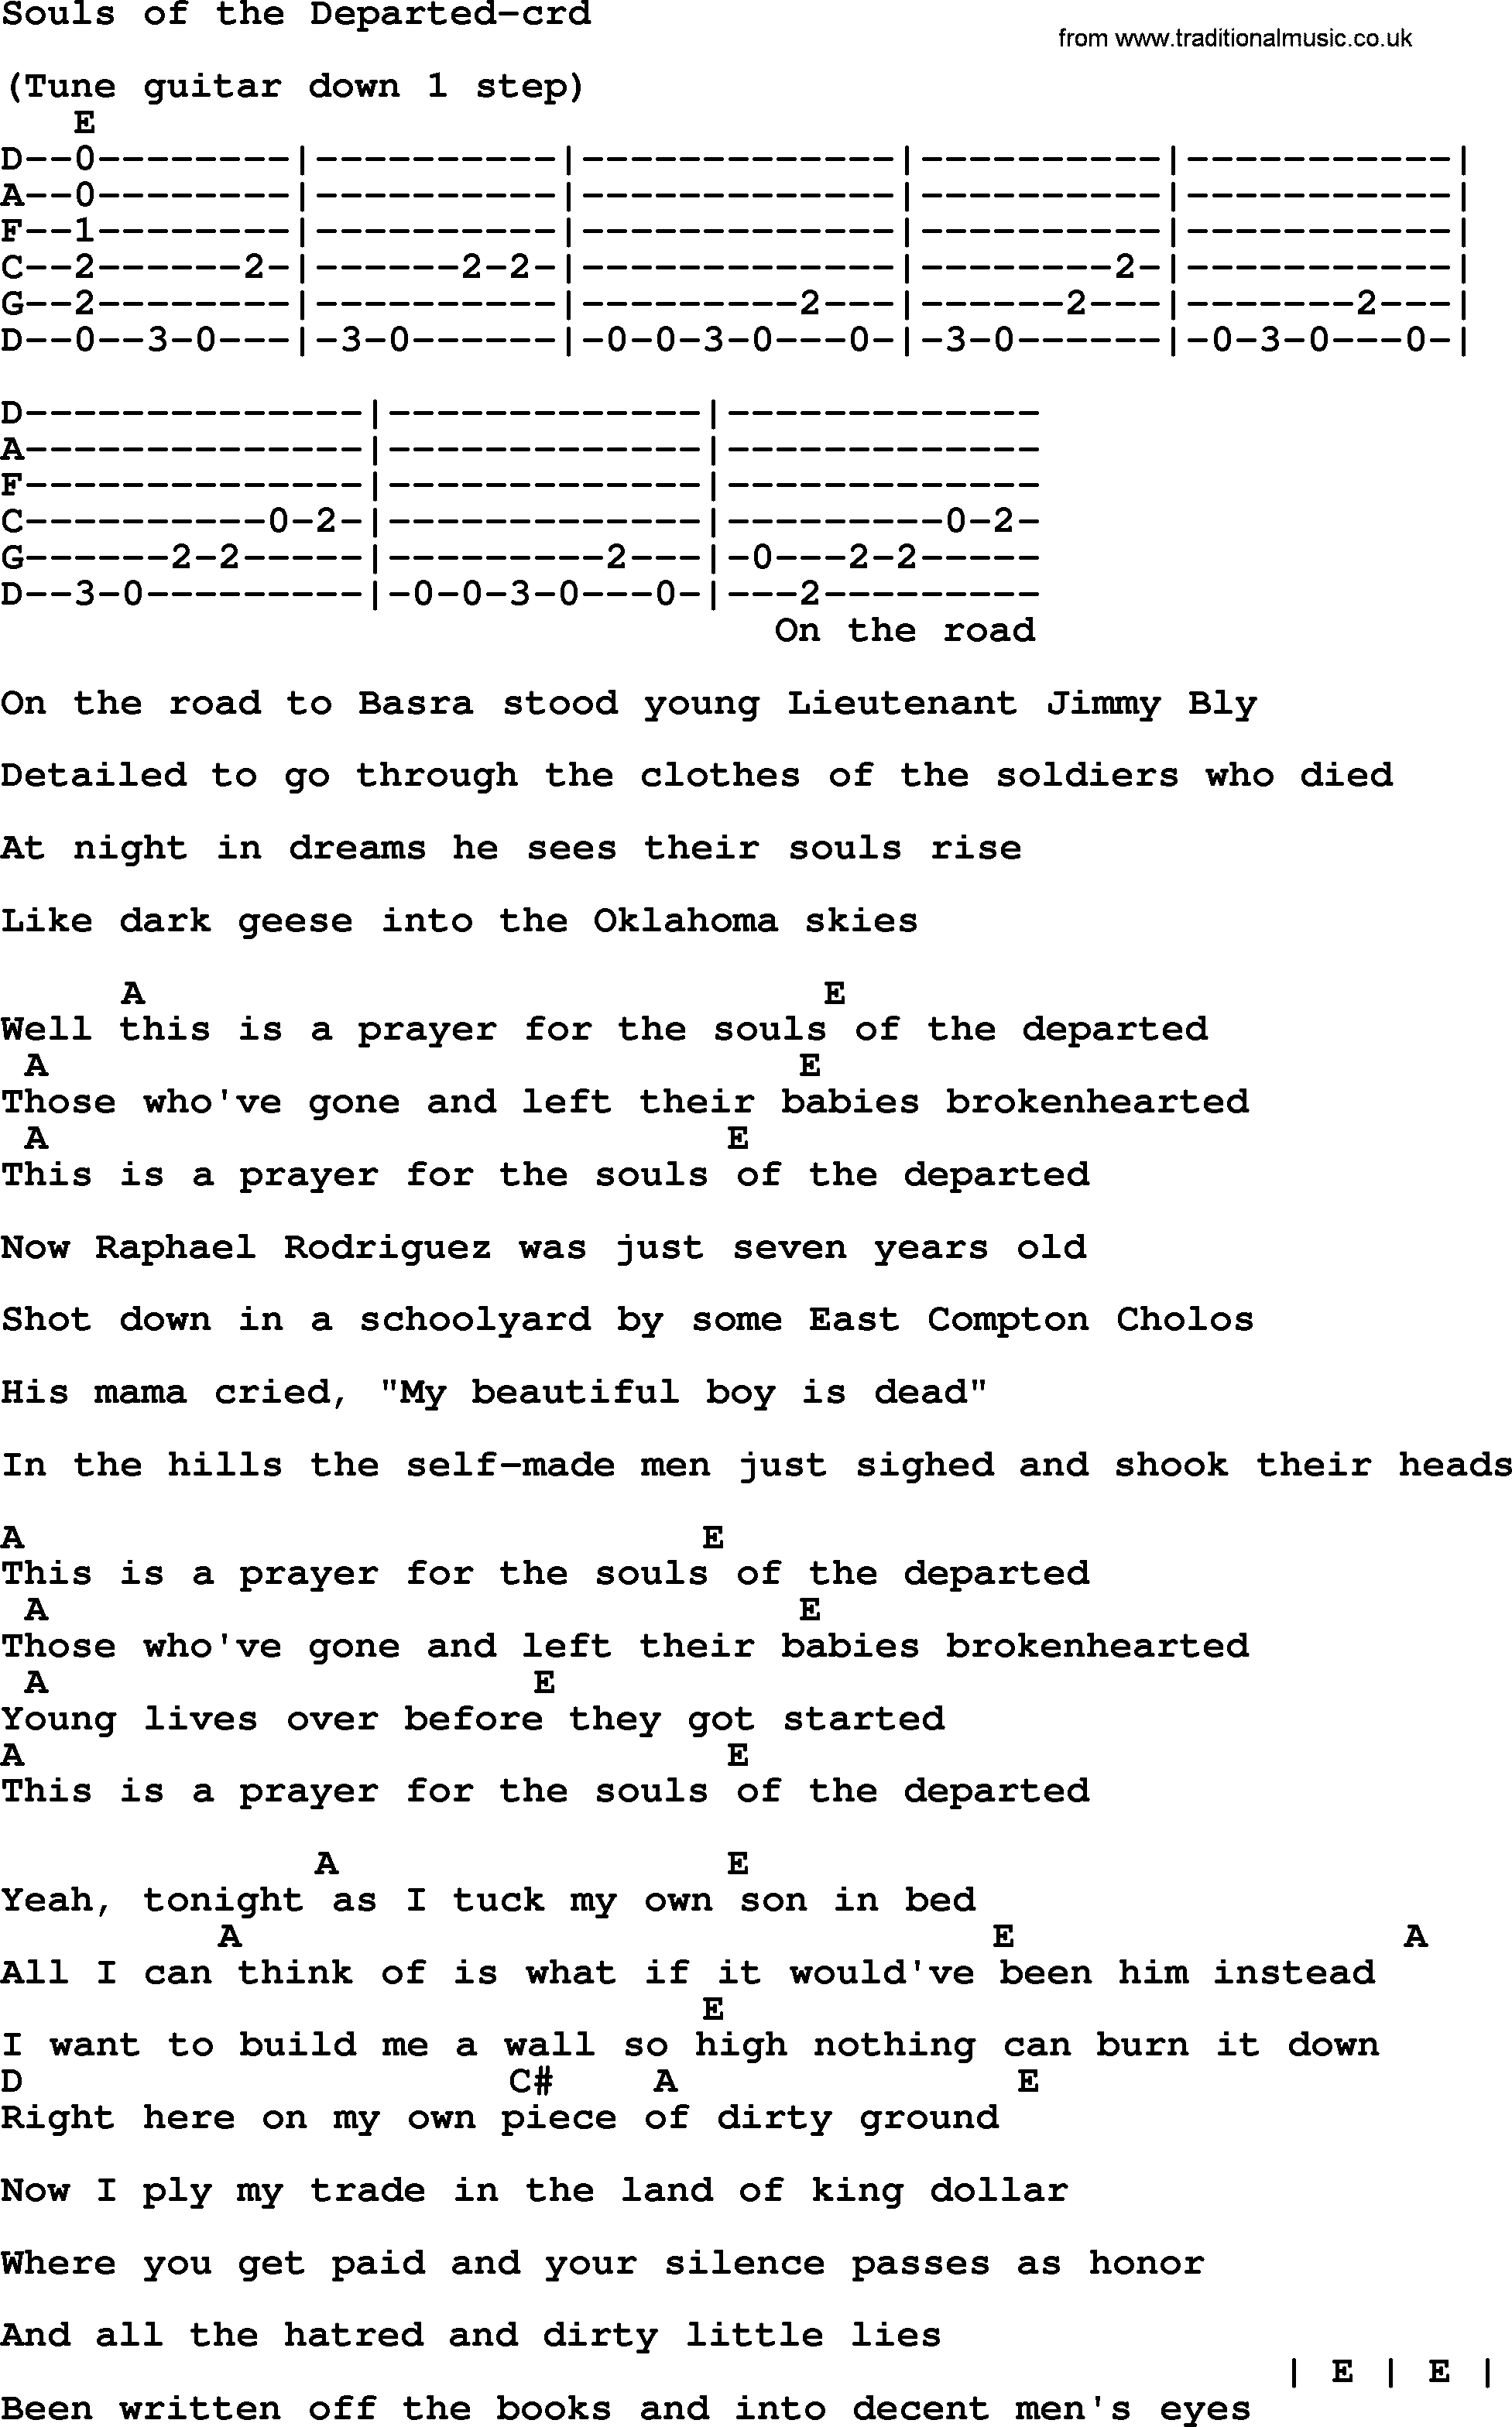 Bruce Springsteen song: Souls Of The Departed, lyrics and chords